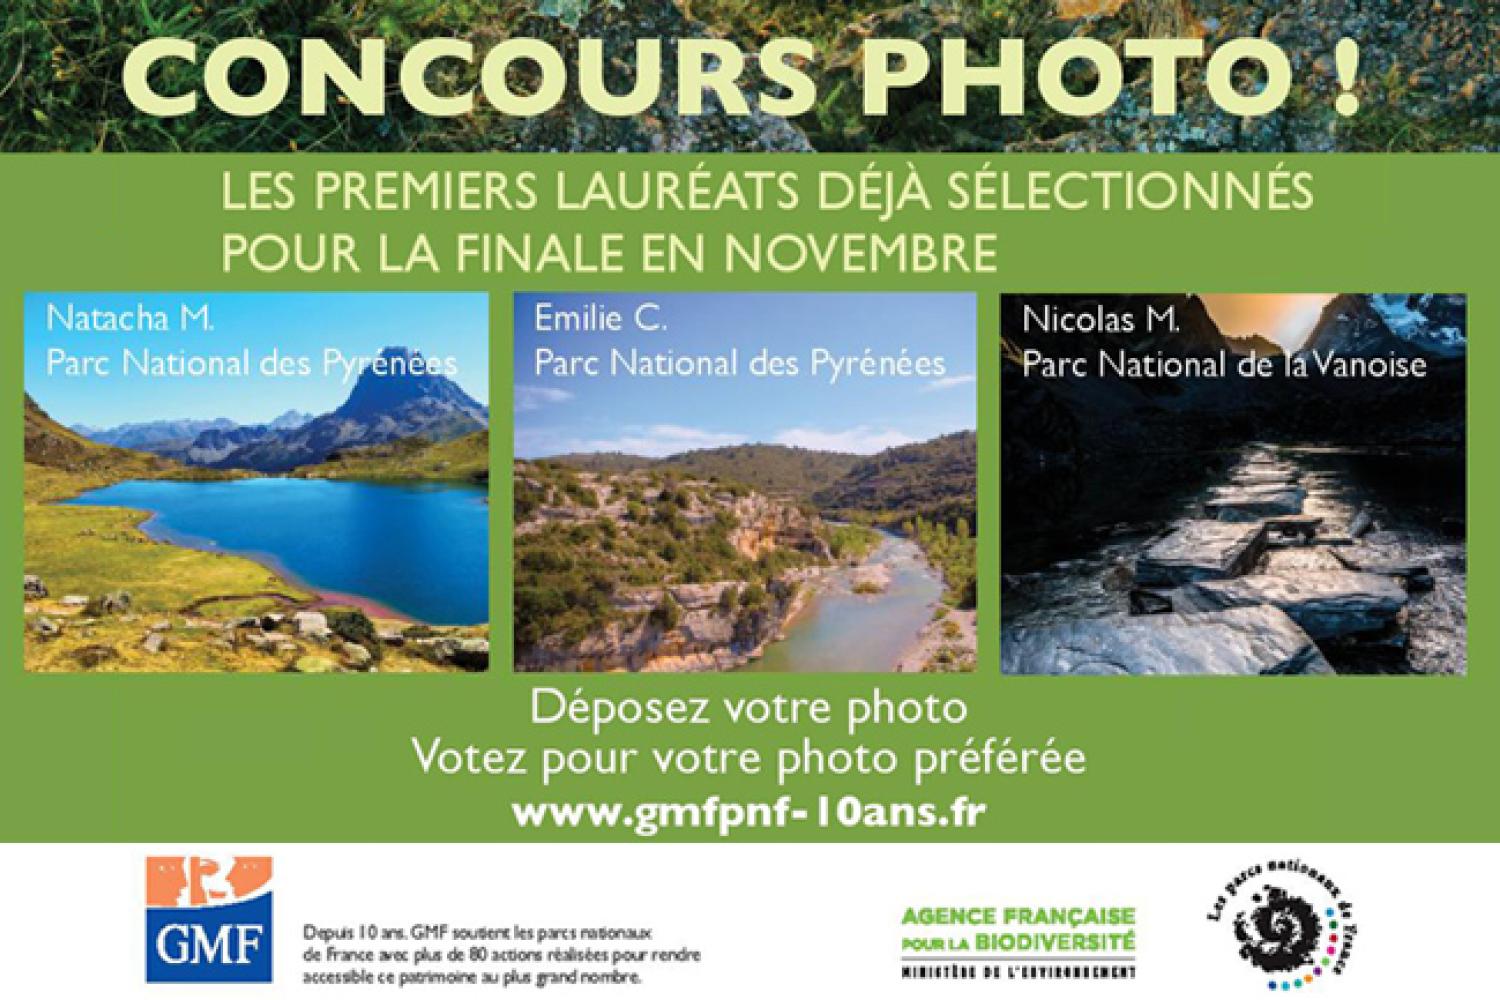 affiche-concours-photo-gmf-pnf-650.jpg